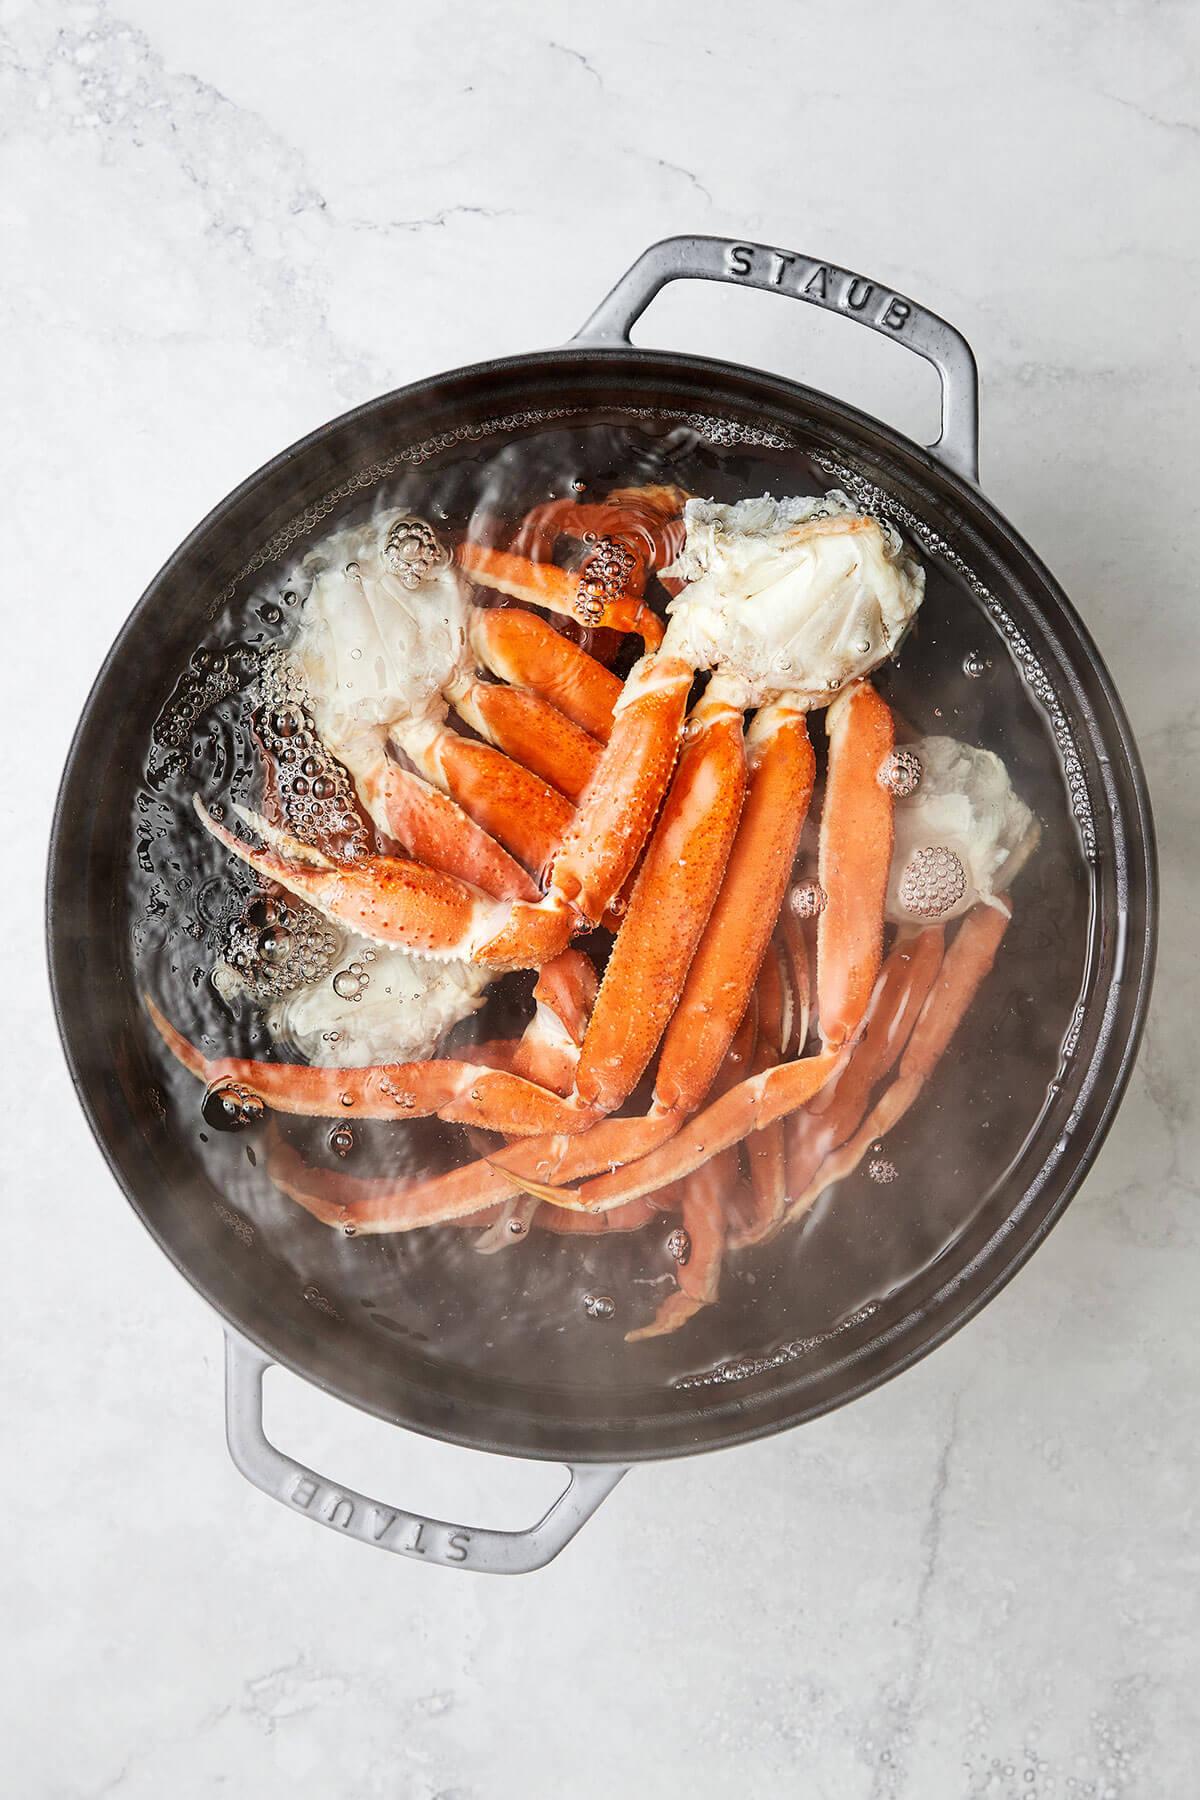 Boiling crab legs in a pot